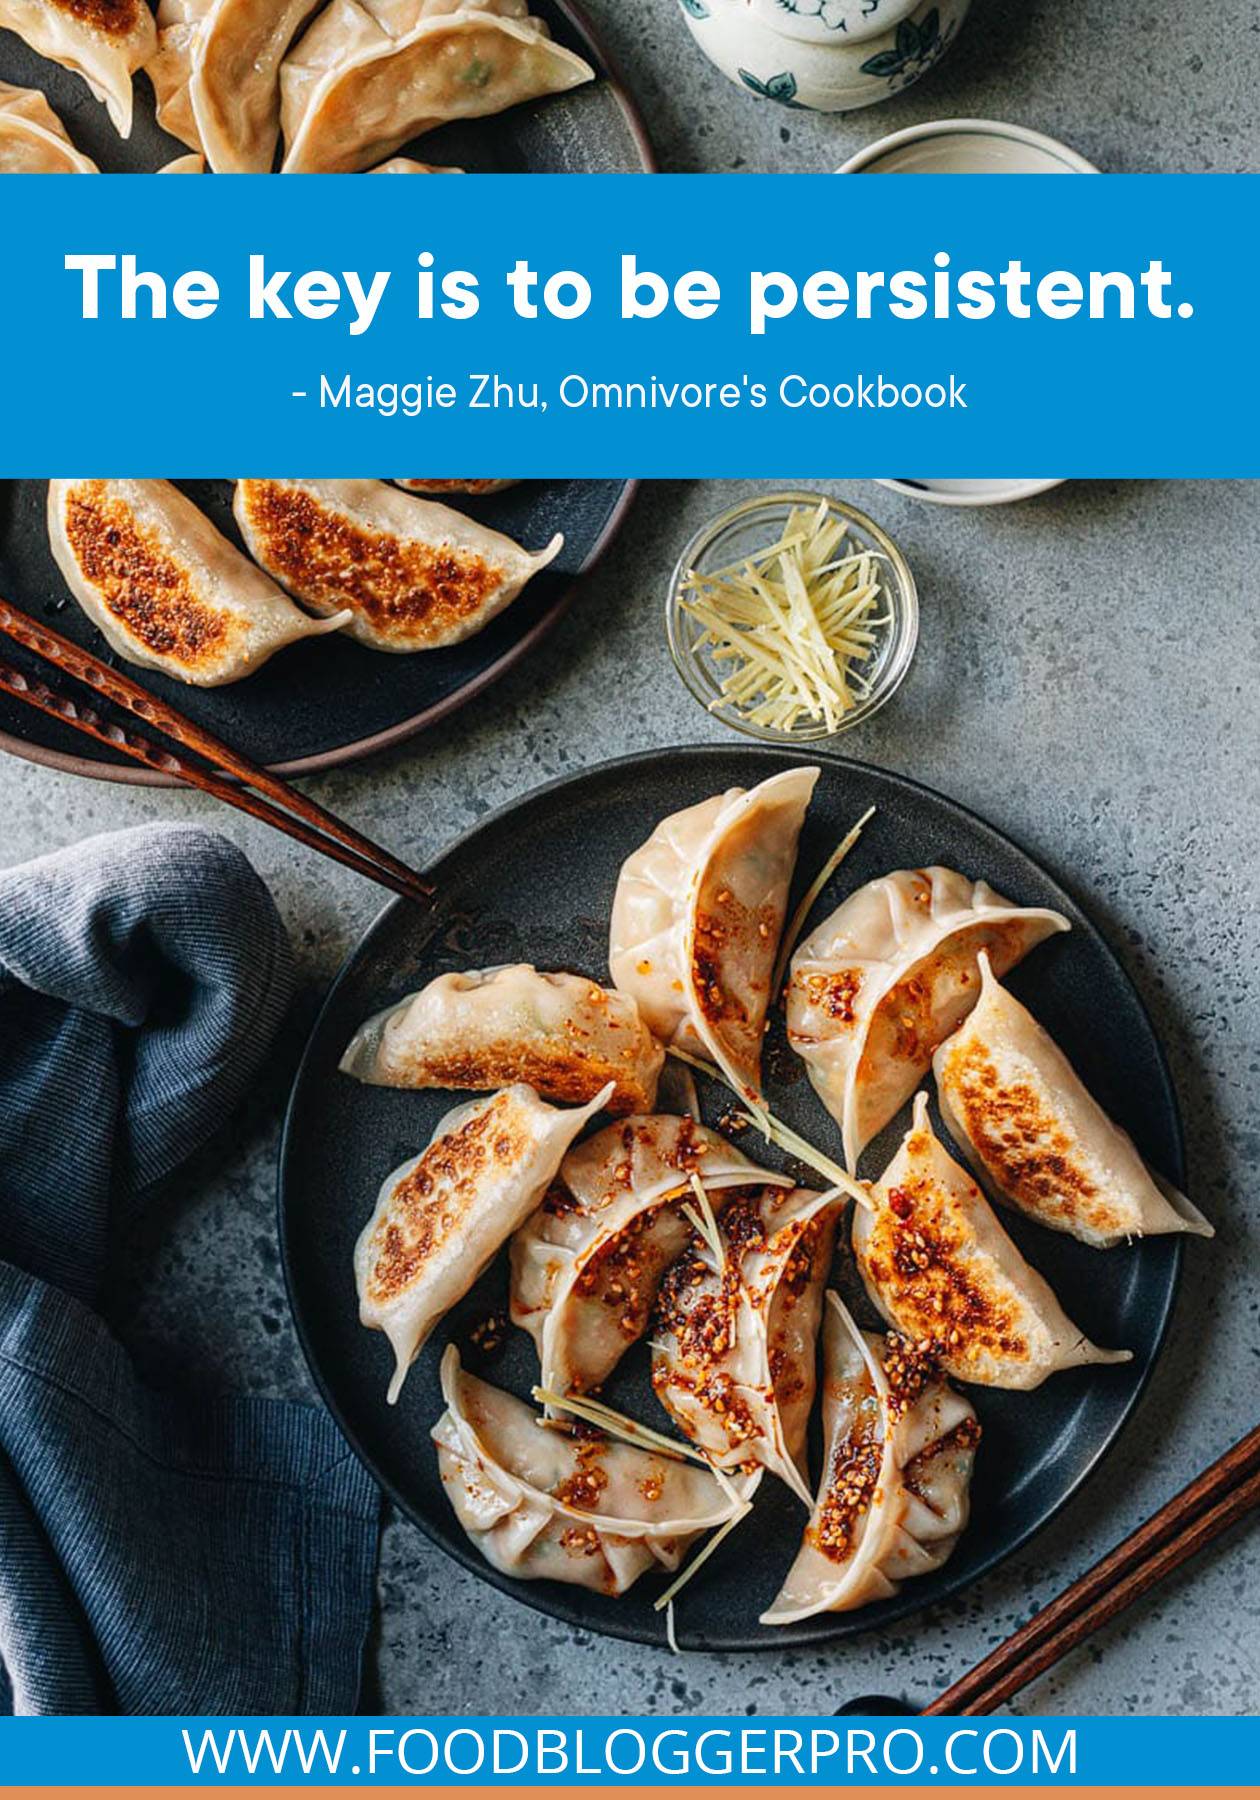 A photograph of Chinese Chicken Dumplings on a plate with a quote from Maggie Zhu's episode of The Food Blogger Pro Podcast, "The key is to be persistent."